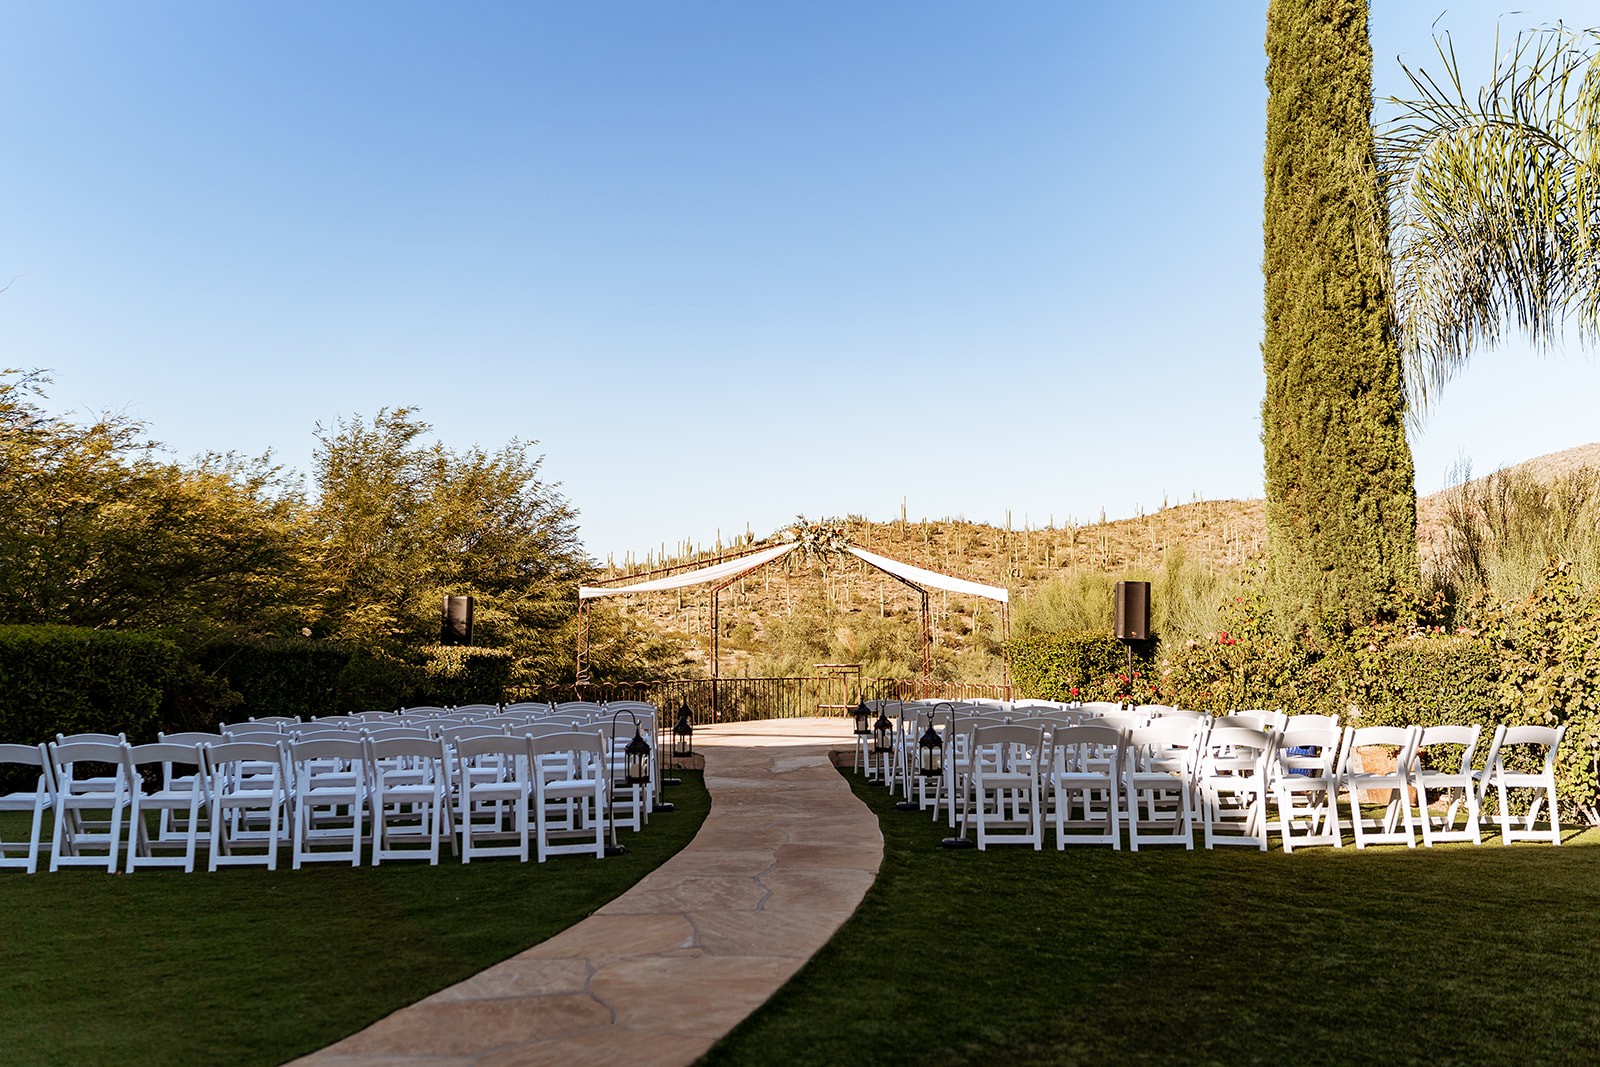 saguaro buttes wedding venue ceremony space set up and decorated